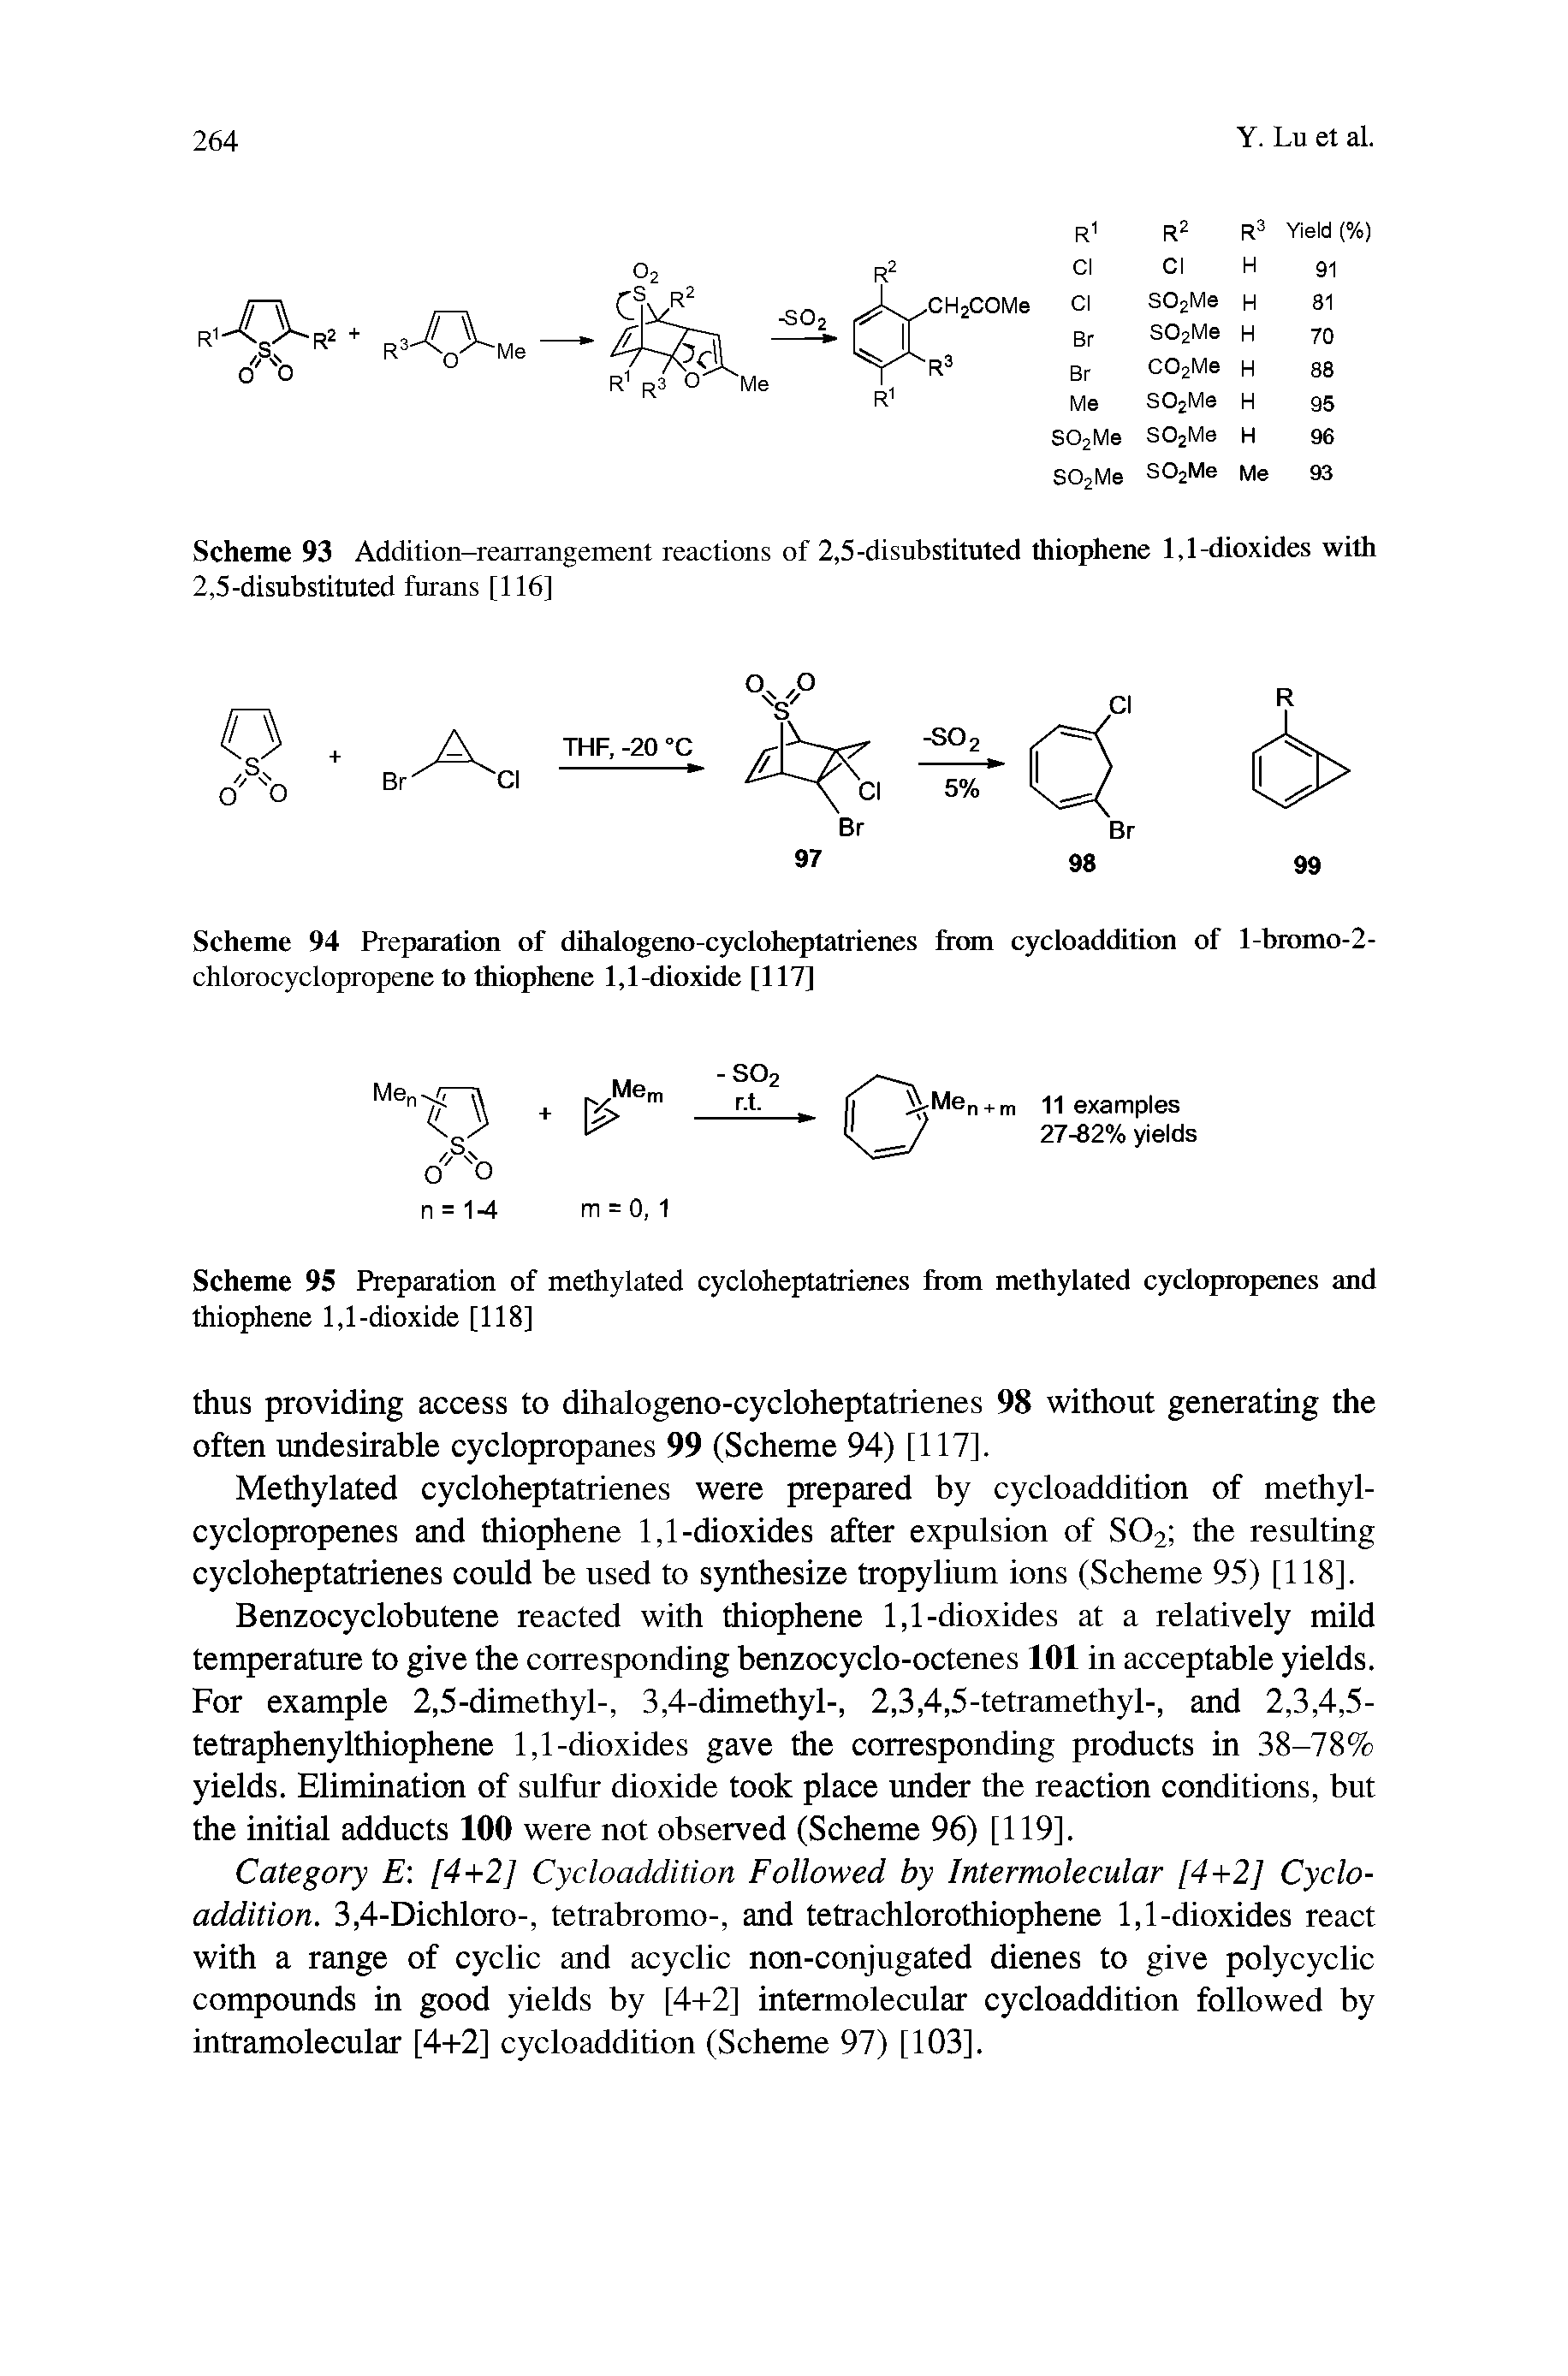 Scheme 93 Addition-rearrangement reactions of 2,5-disubstituted thiophene 1,1-dioxides with 2,5-disubstituted furans [116]...